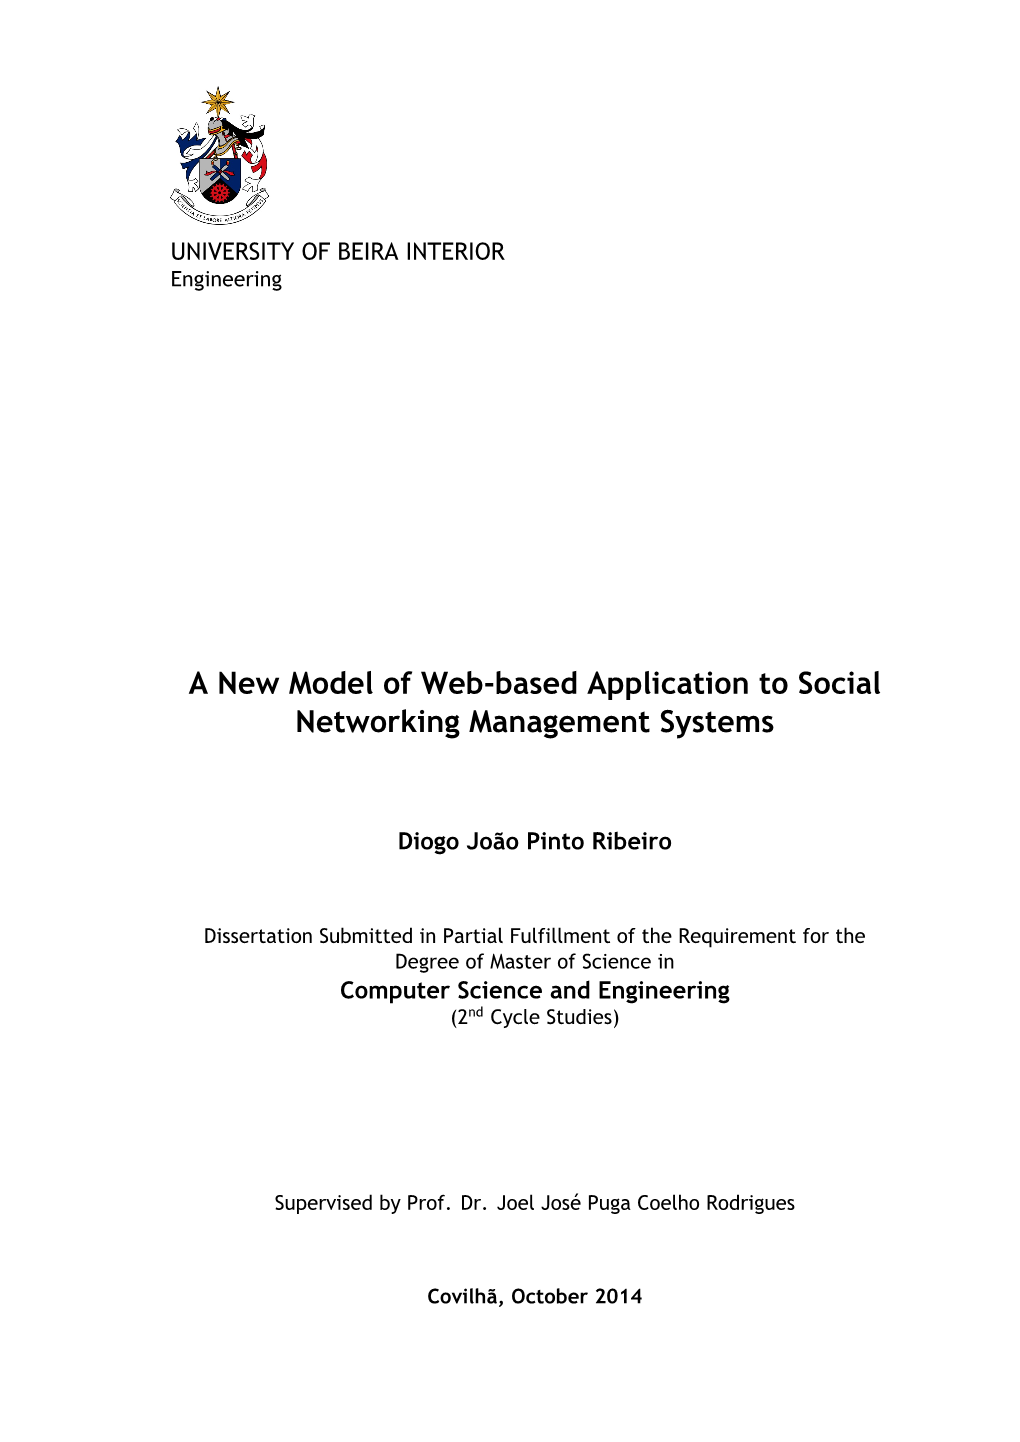 A New Model of Web-Based Application to Social Networking Management Systems